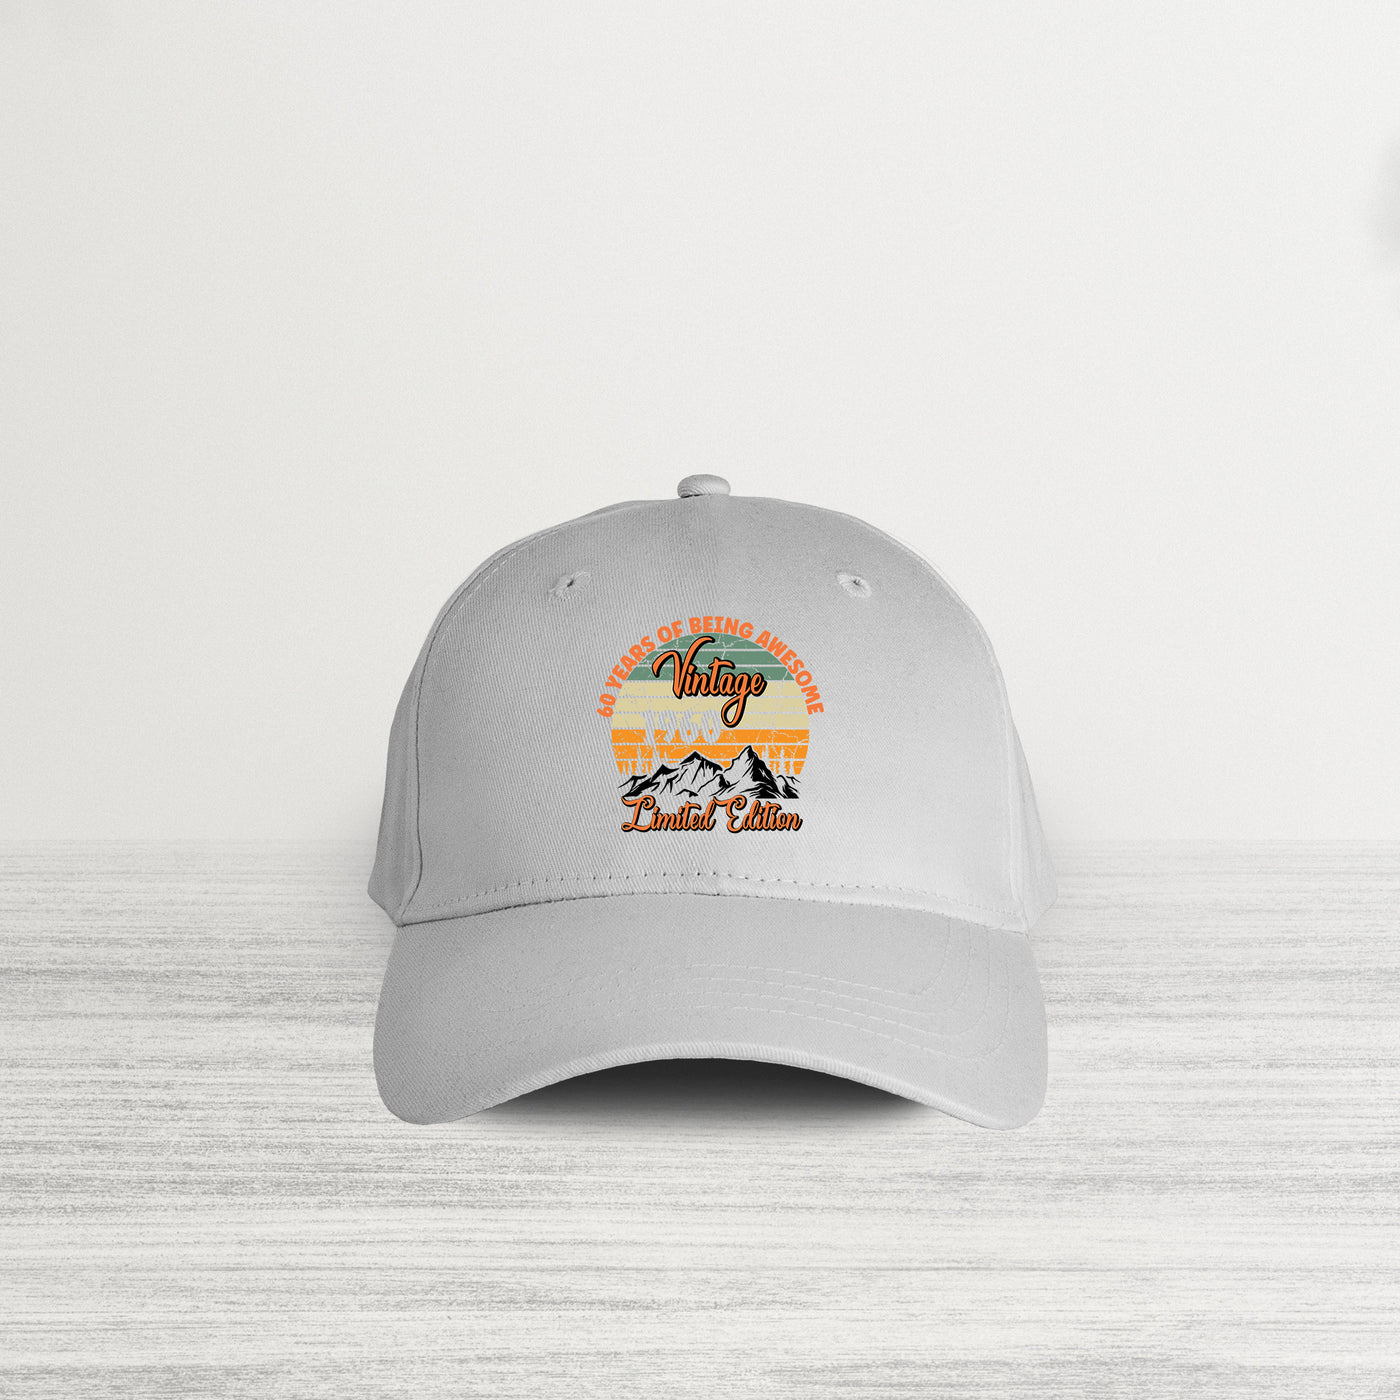 60 Years of Being Awesome HAT